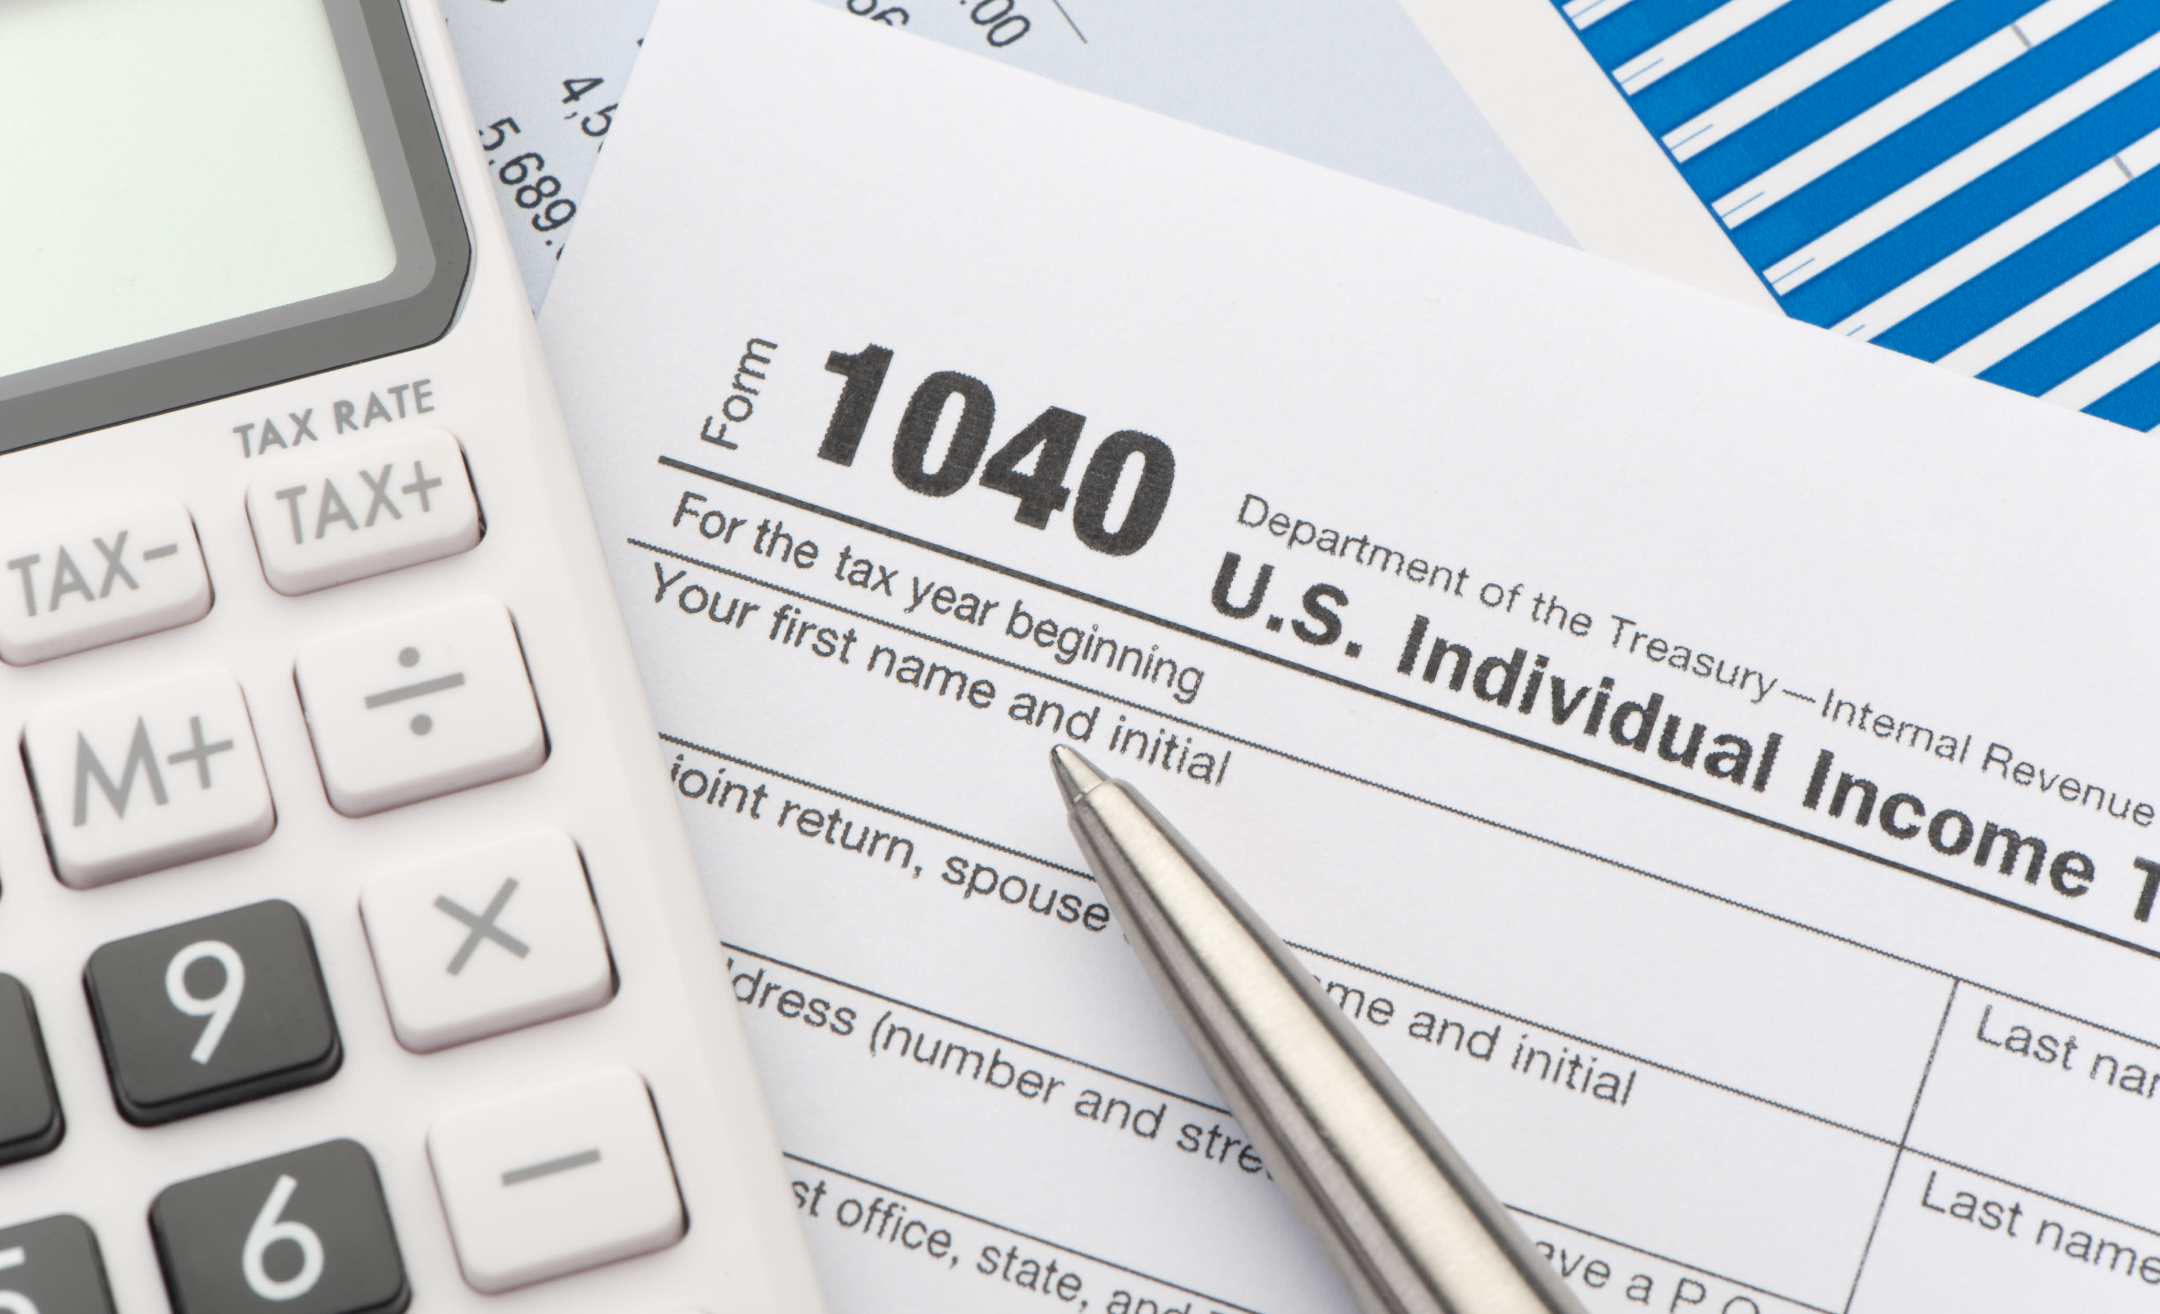 taxes - 4.5. 5.689. 5 50 1040 For the tax year beginning Department of the TreasuryInternal Revenue U.S. Individual Income T Your first name and initial ioint return, spouse Tax Rate TaxTax |M M 9 56 X 'dress number and stre st office, state, and Last nar